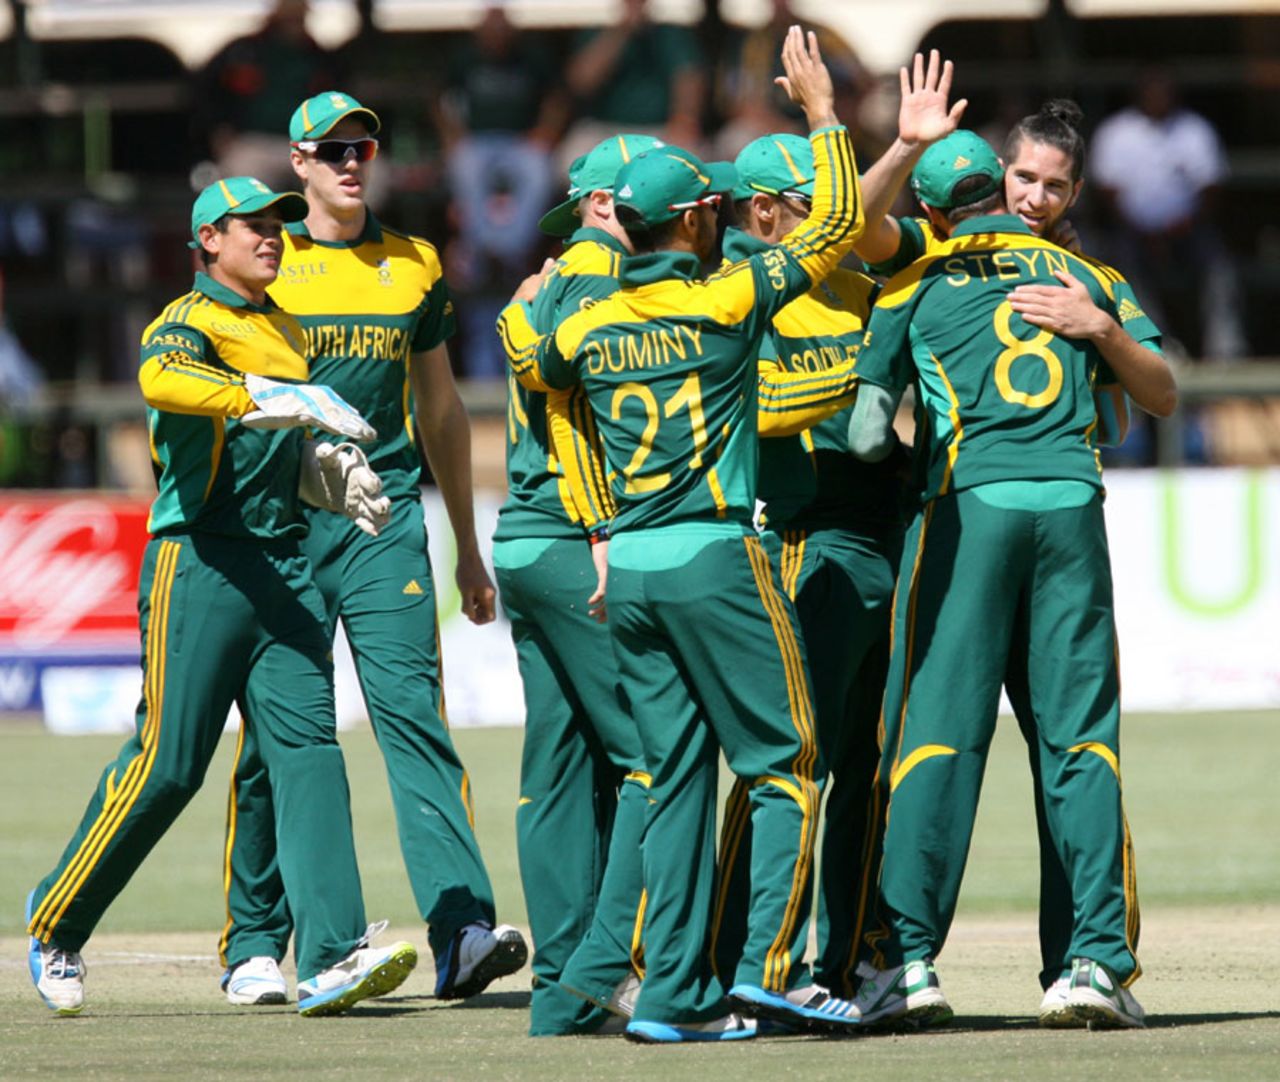 Wayne Parnell is congratulated after a wicket, Australia v South Africa, tri-series final, Harare, September 6, 2014